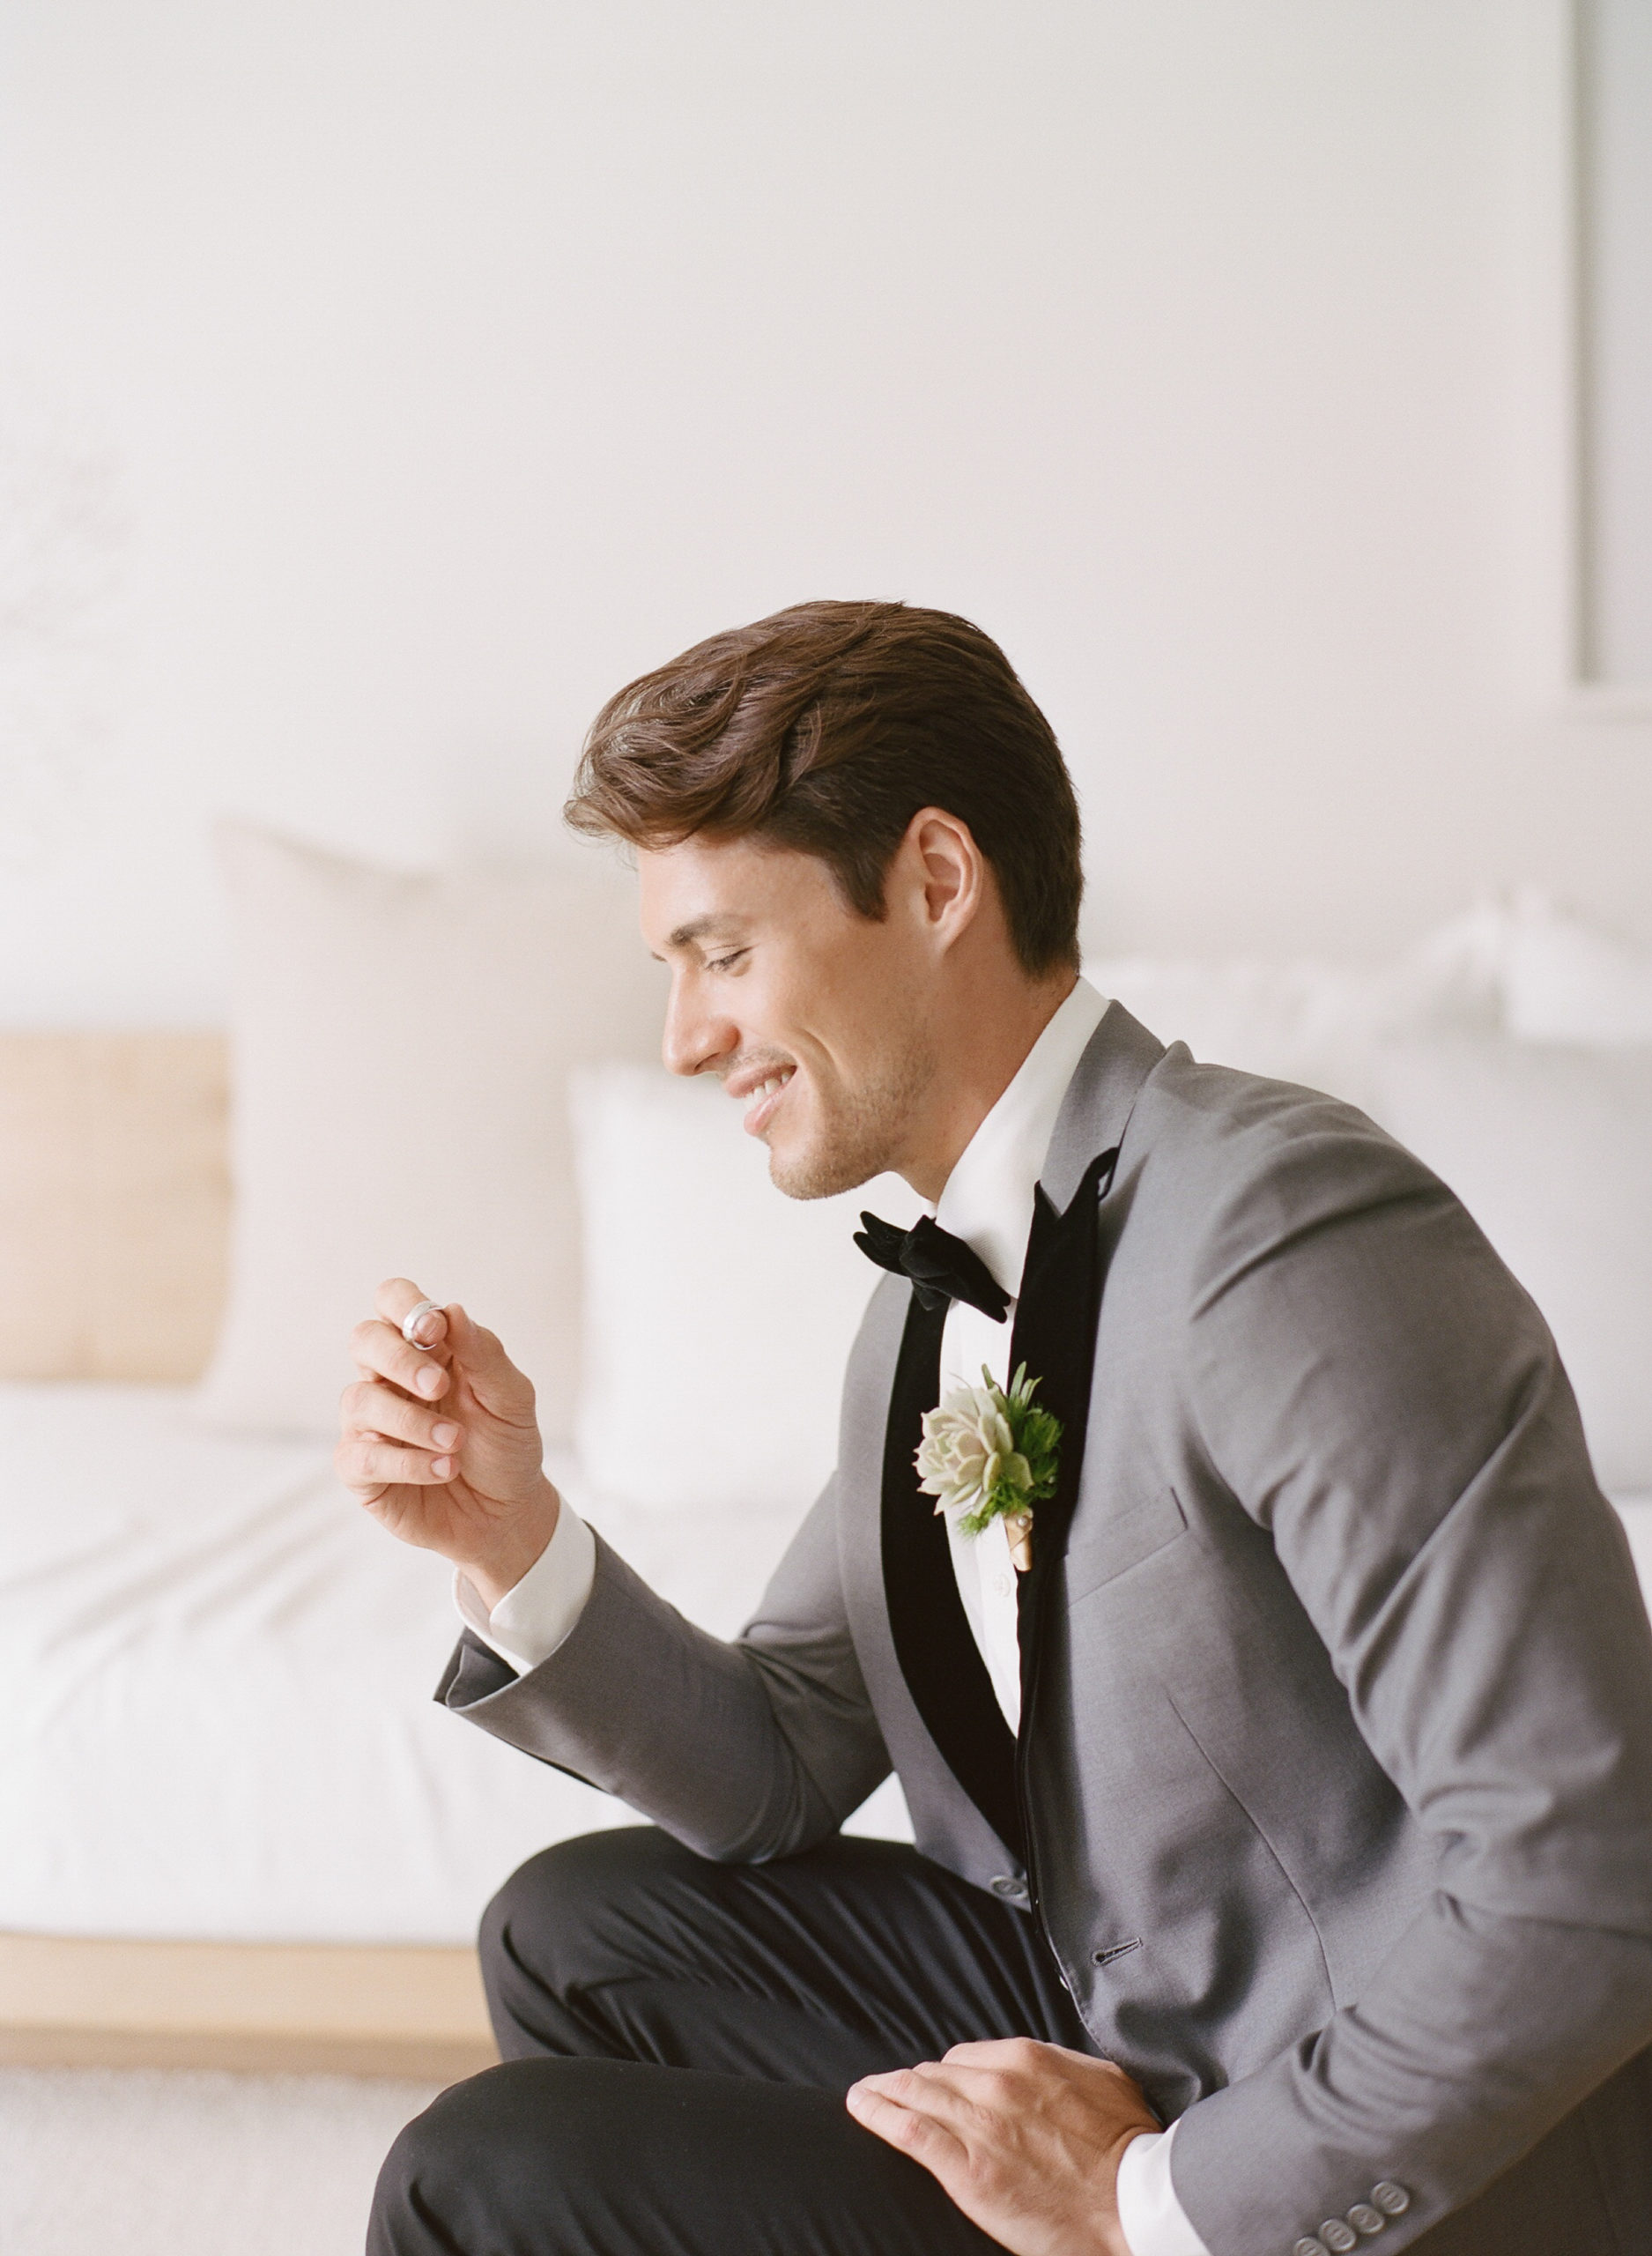 Must have photo of the groom while he is getting ready